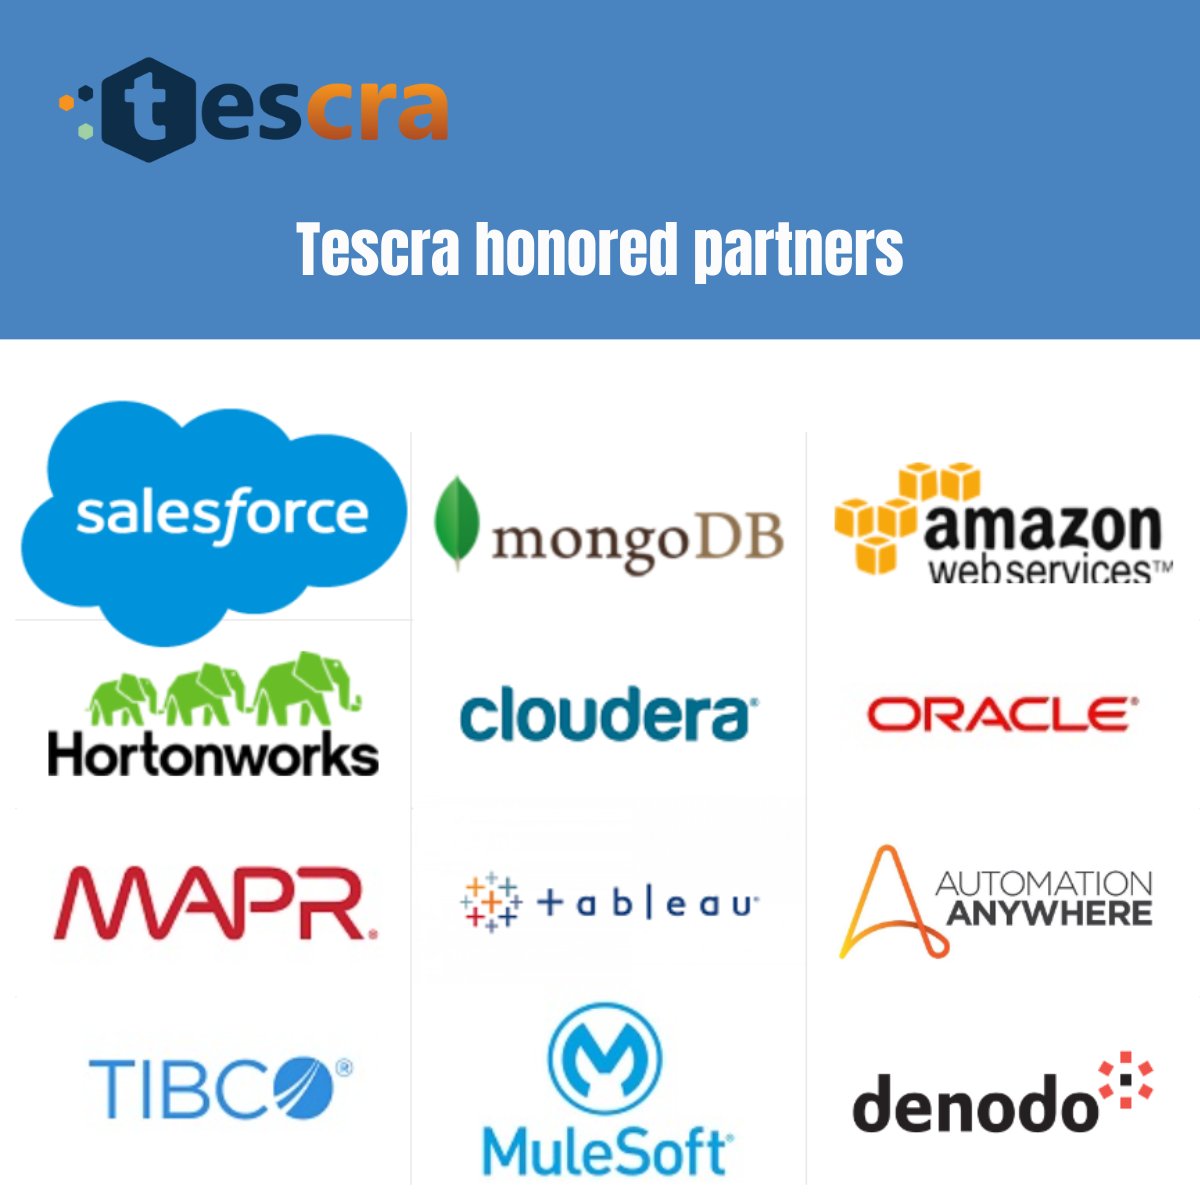 Digital Transformation focuses more on customer experience. It helps businesses design applications that are easy to use for customers
Tescra Honored Partners
#salesforce #mangodb #amazonwebservices #hortonworks #oracle #cloudera #Mapr #tableau #automationanywhere #tibco